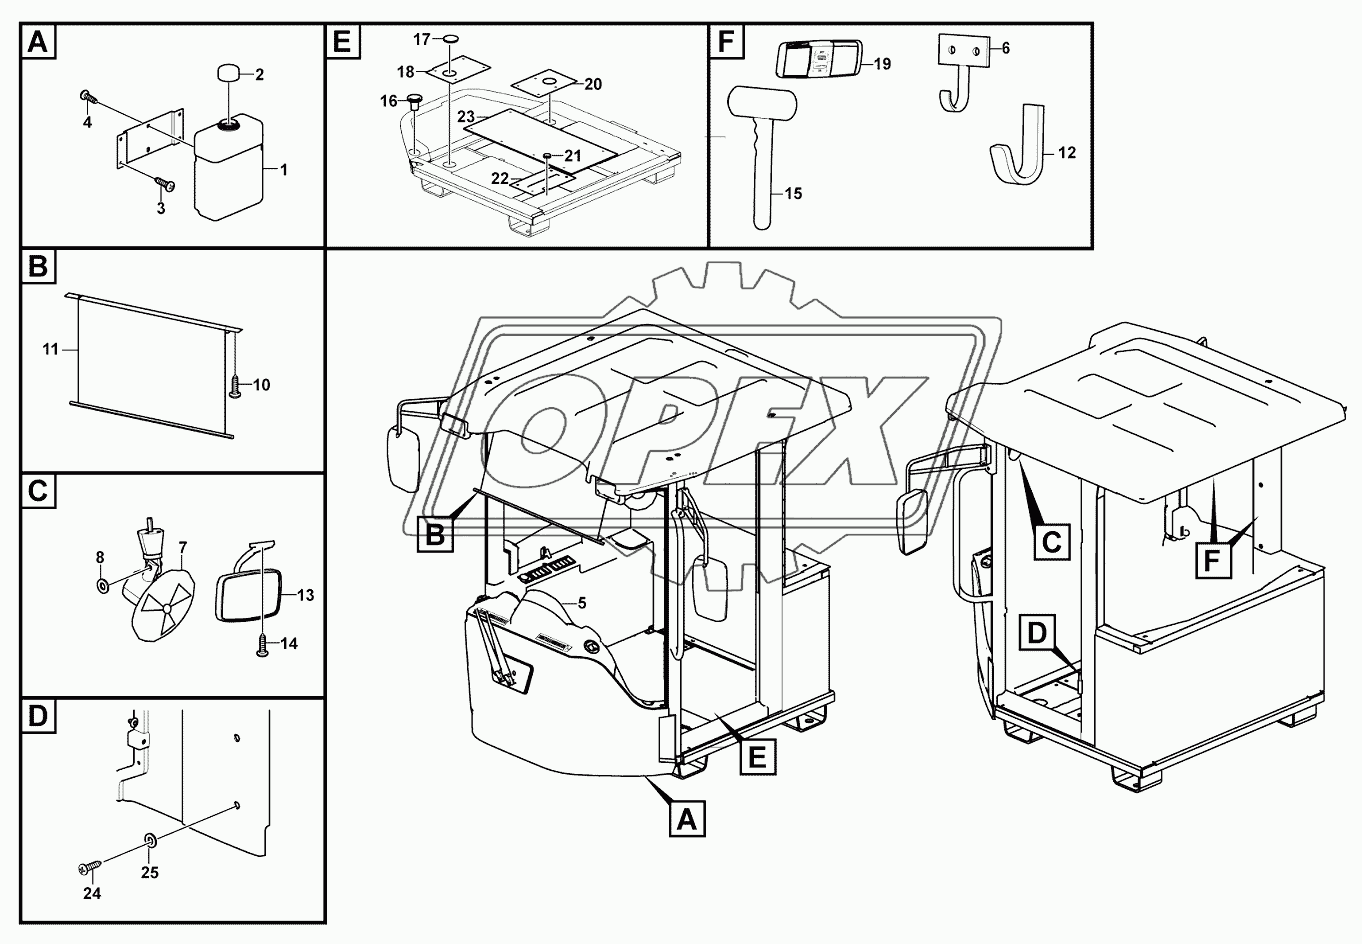 Cab inner parts assembly